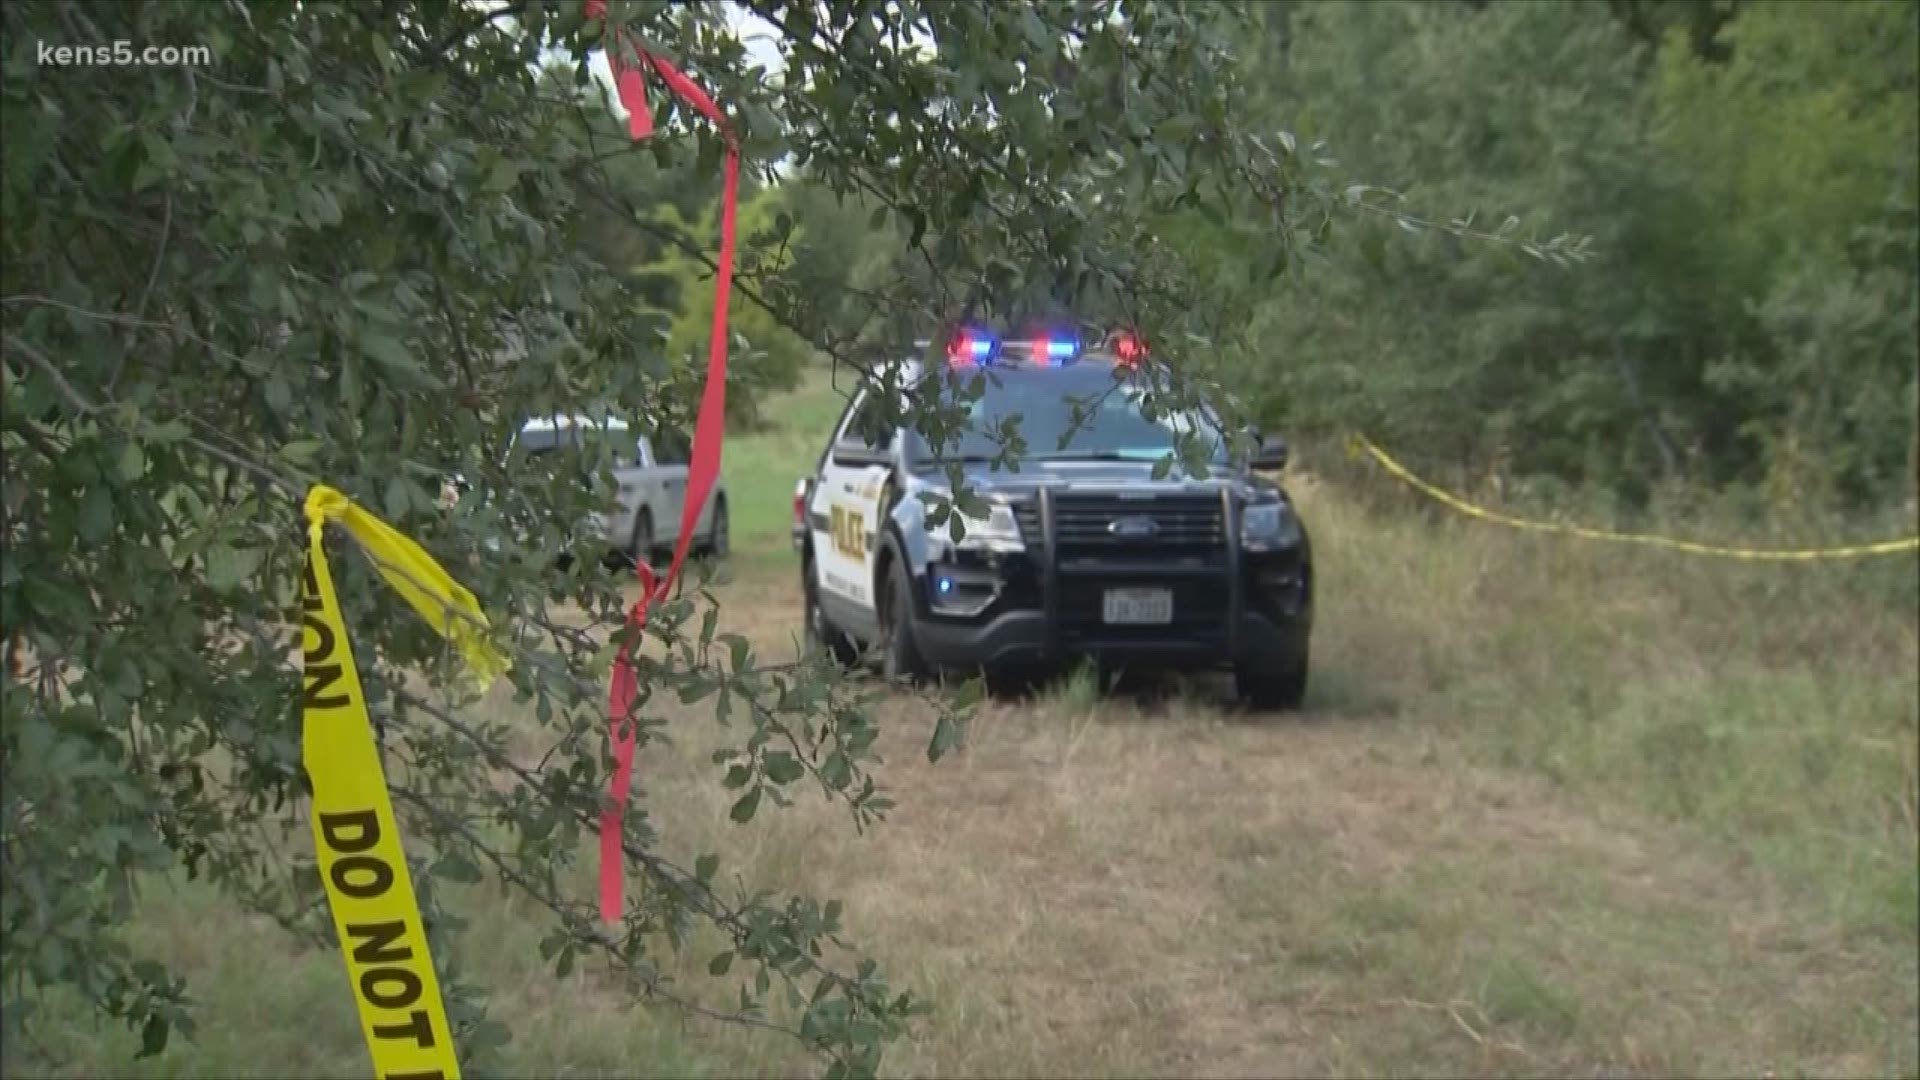 According to police, the remains were found by surveyors walking through the woods near 1604 and Babcock Road.